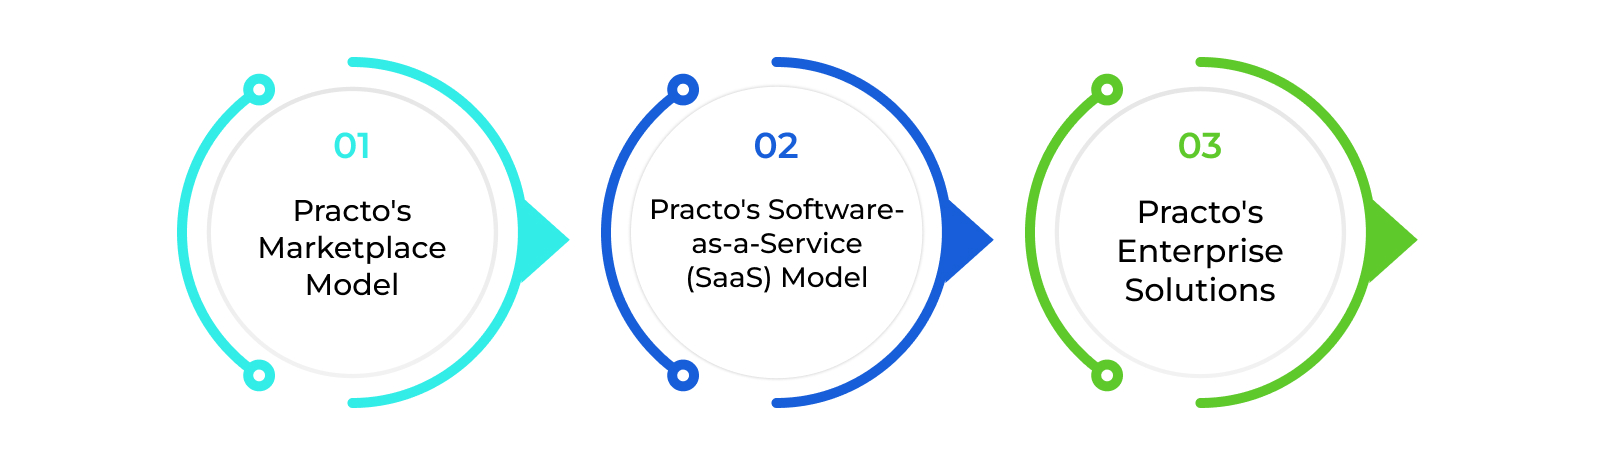 Business Model Of Practo